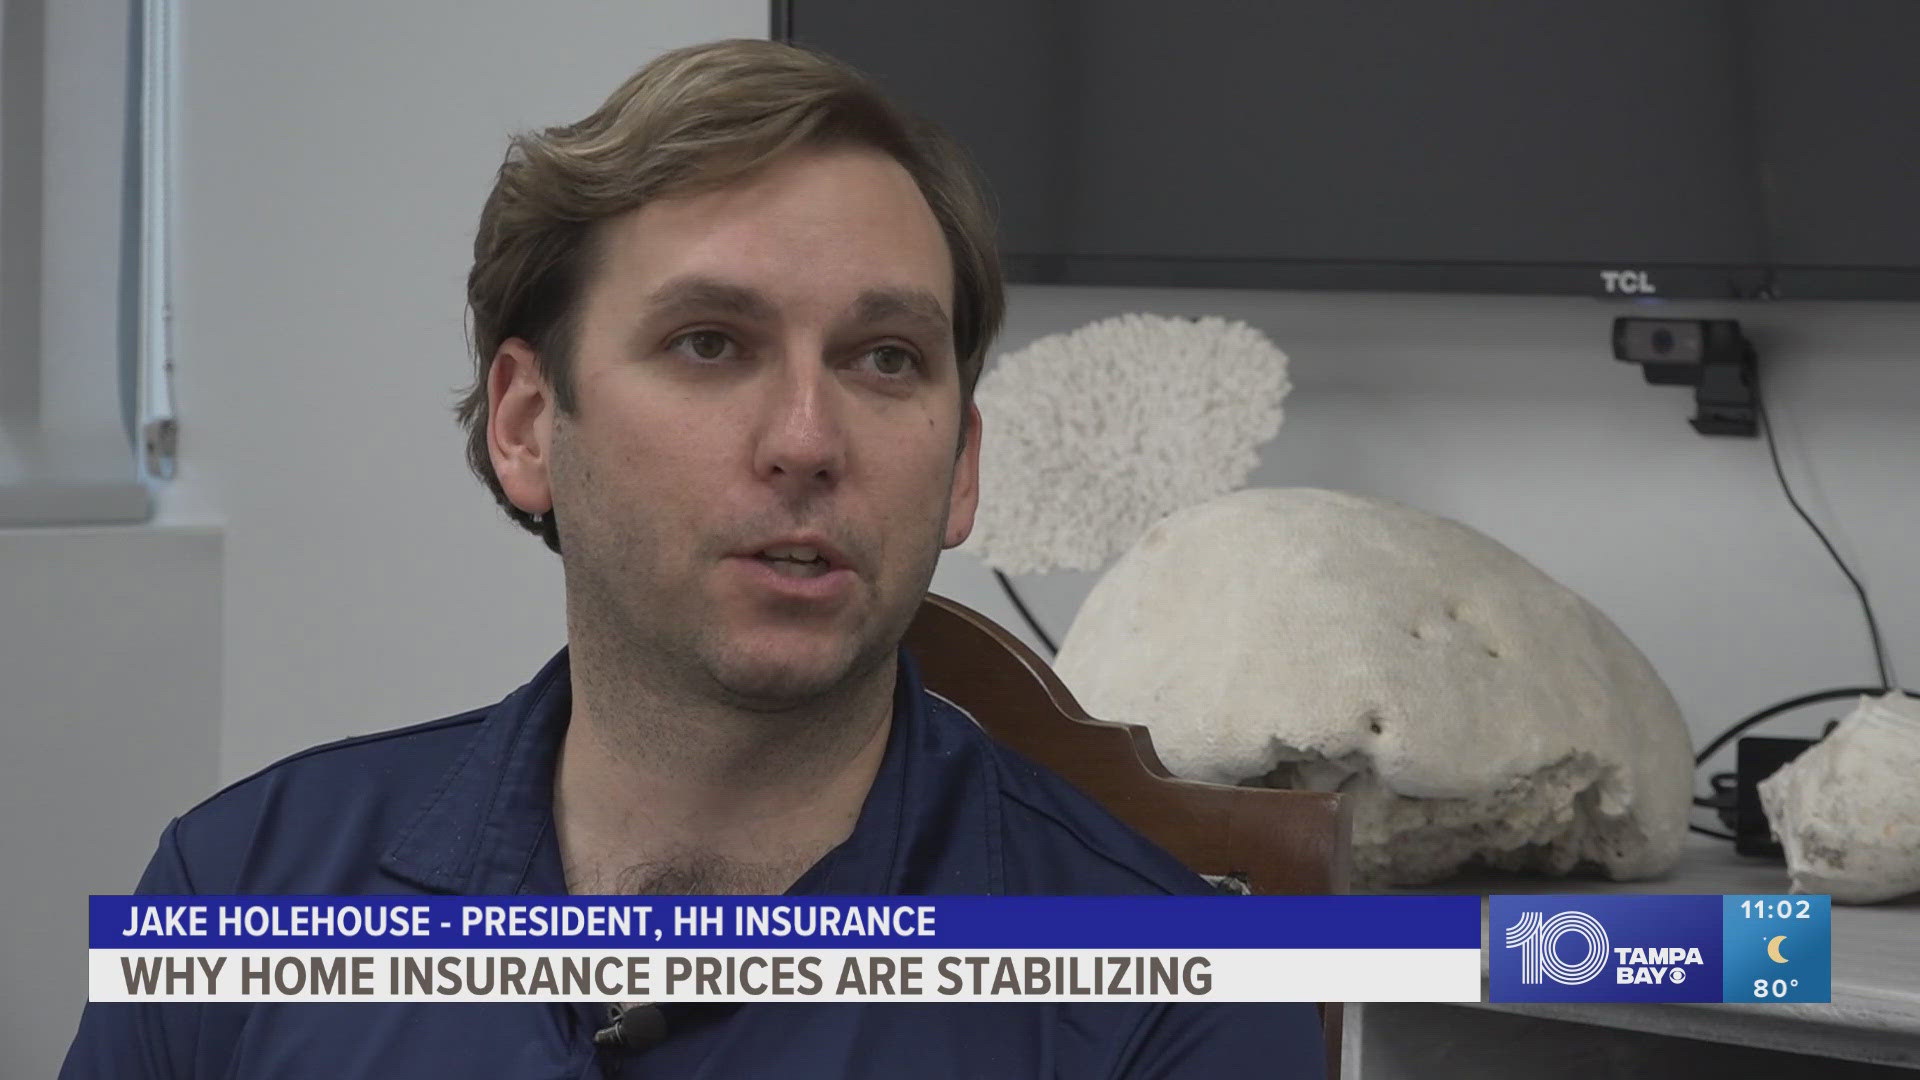 So far this year, 10 insurance carriers have filed a 0% increase with the state.